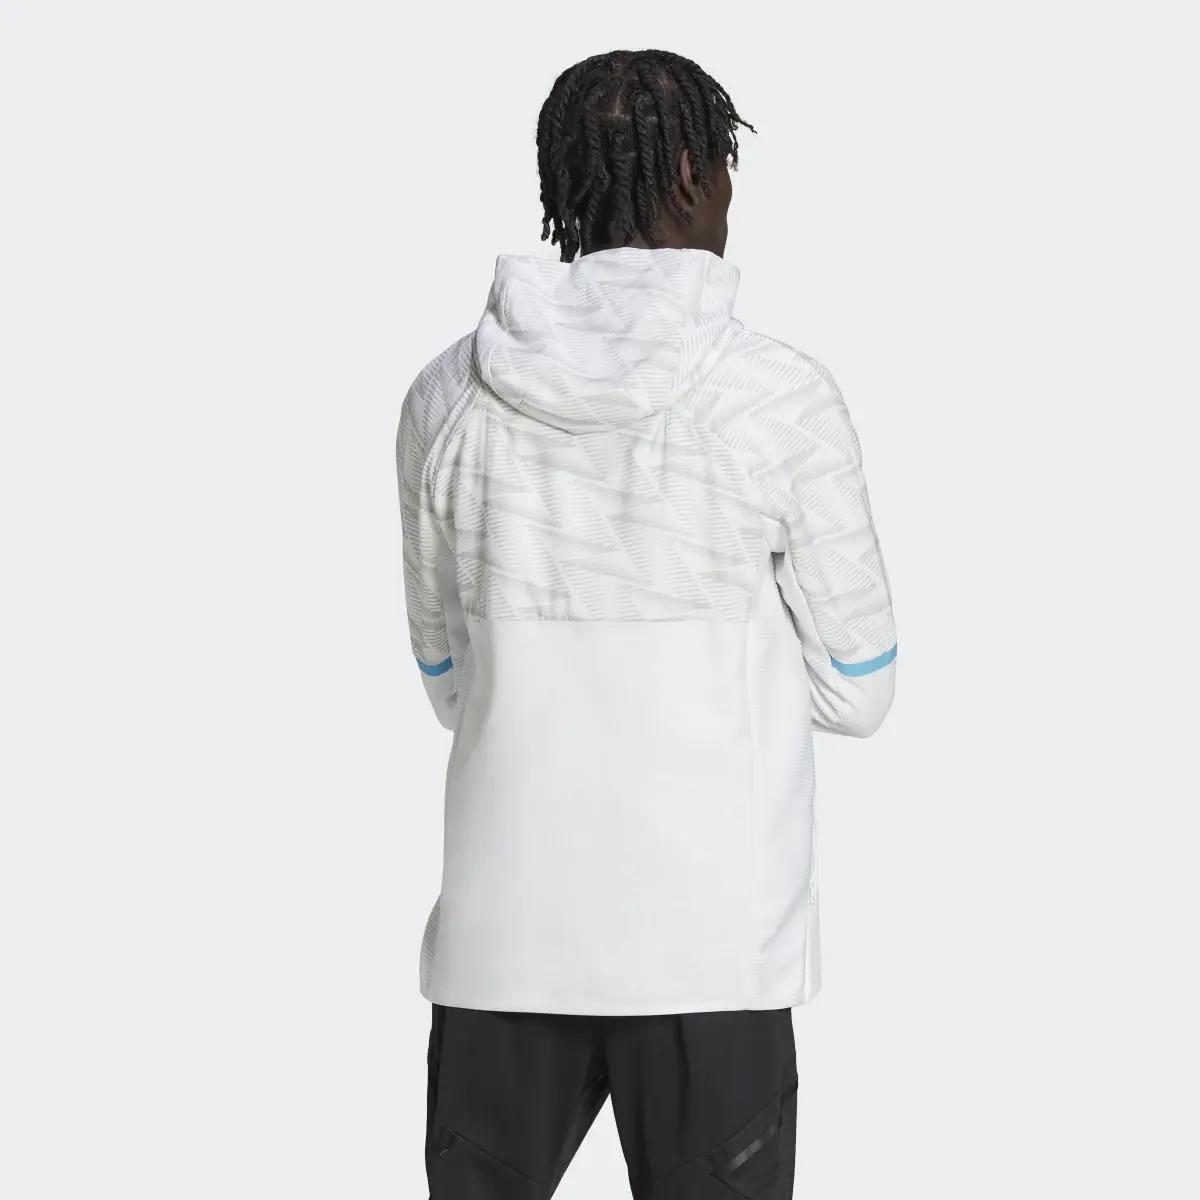 Adidas Mexico Game Day Full-Zip Travel Hoodie. 3